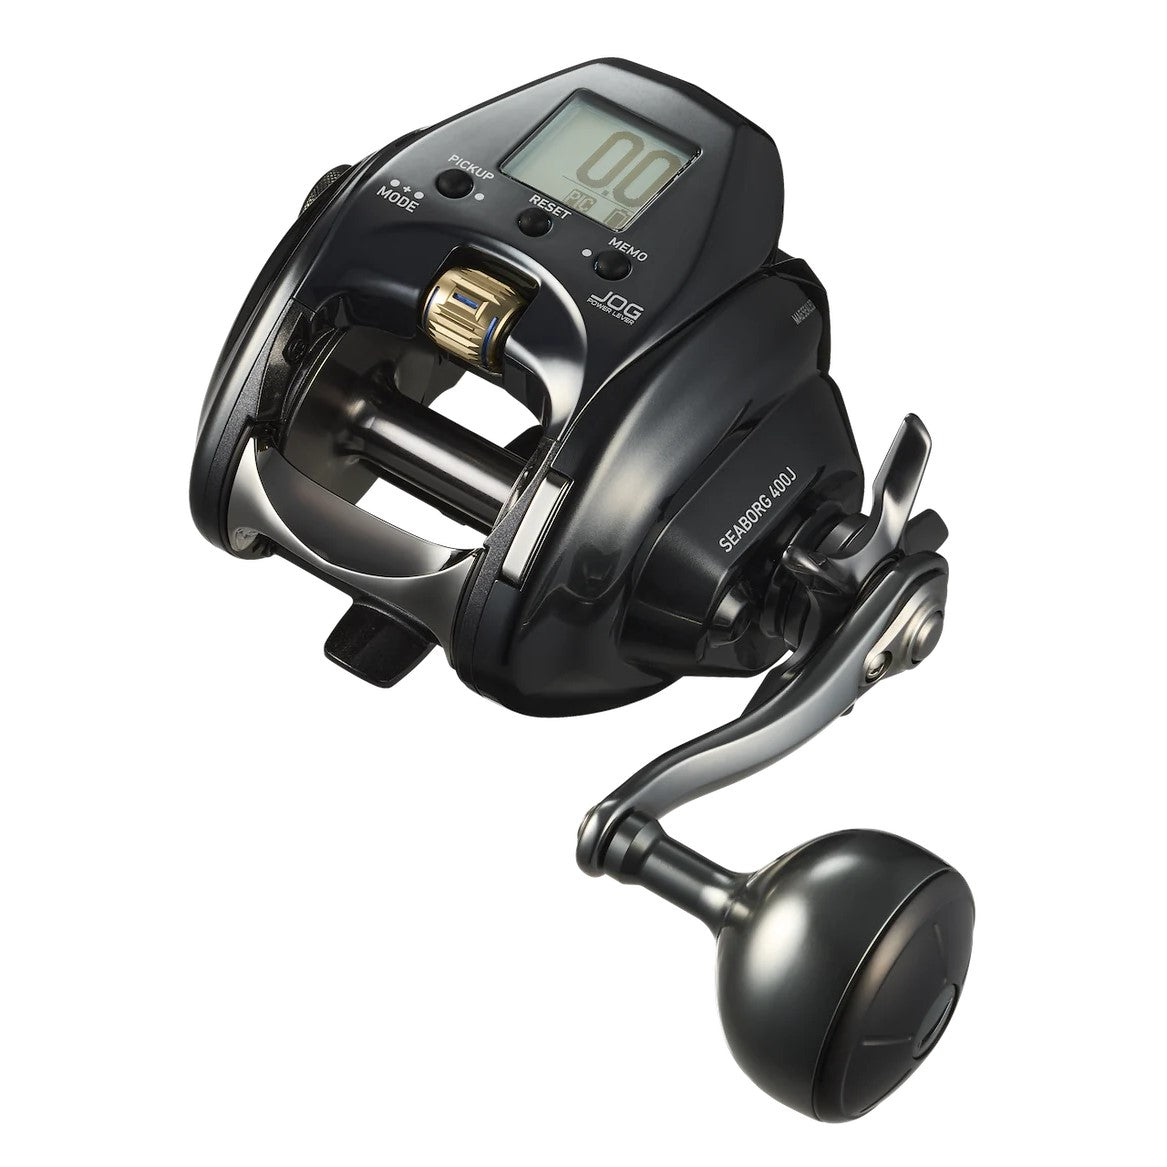 Daiwa Reels - Compleat Angler Nedlands Pro Tackle